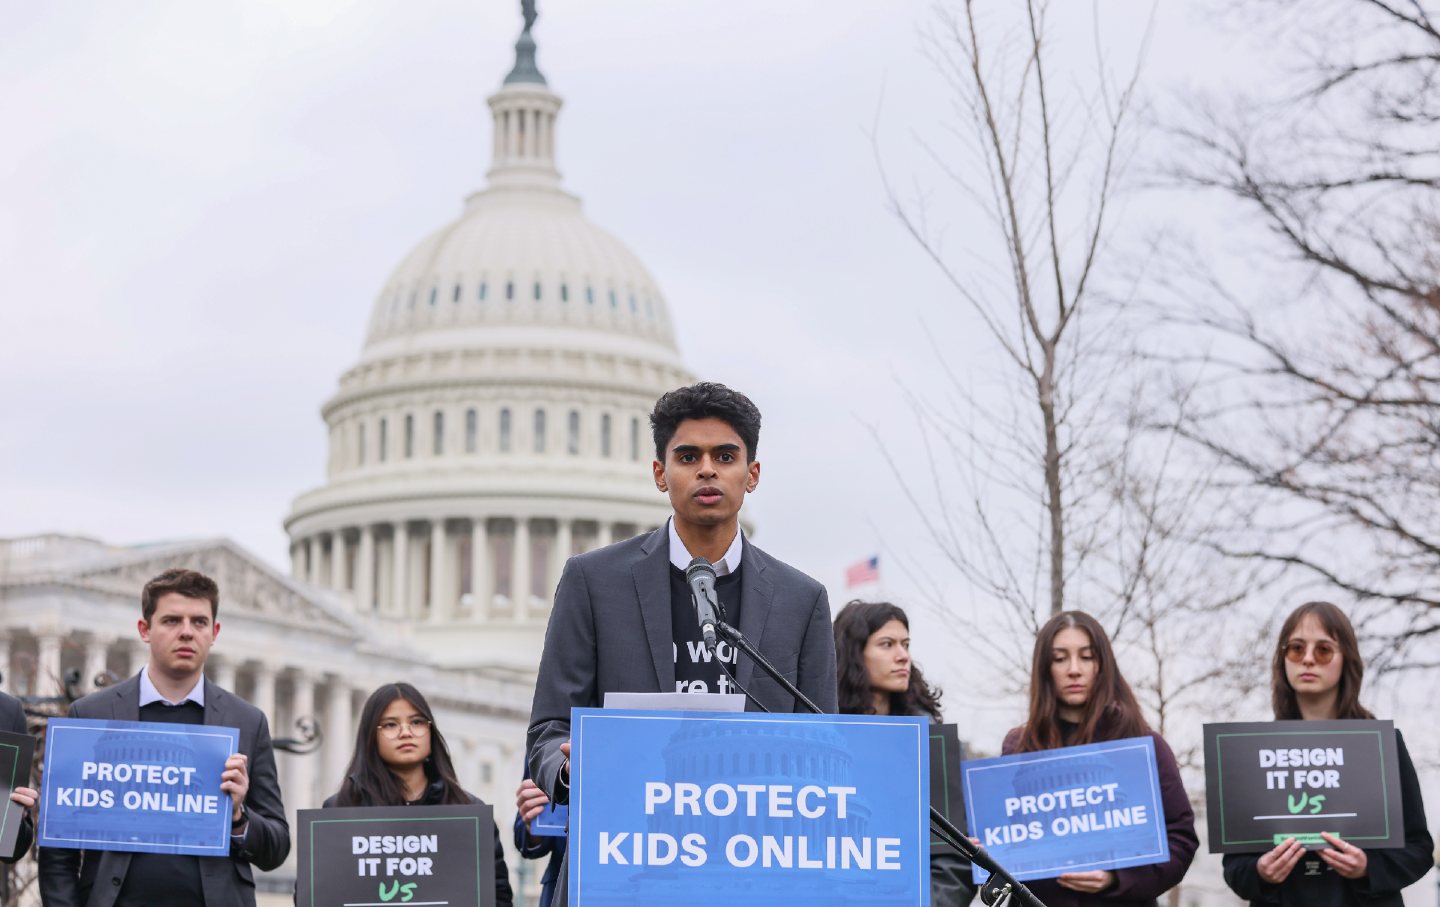 WASHINGTON, DC - JANUARY 31: Zamaan Qureshi speaks during a rally organized by Accountable Tech and Design It For Us to hold tech and social media companies accountable for taking steps to protect kids and teens online on January 31, 2024 in Washington, DC. (Photo by Jemal Countess/Getty Images for Accountable Tech)